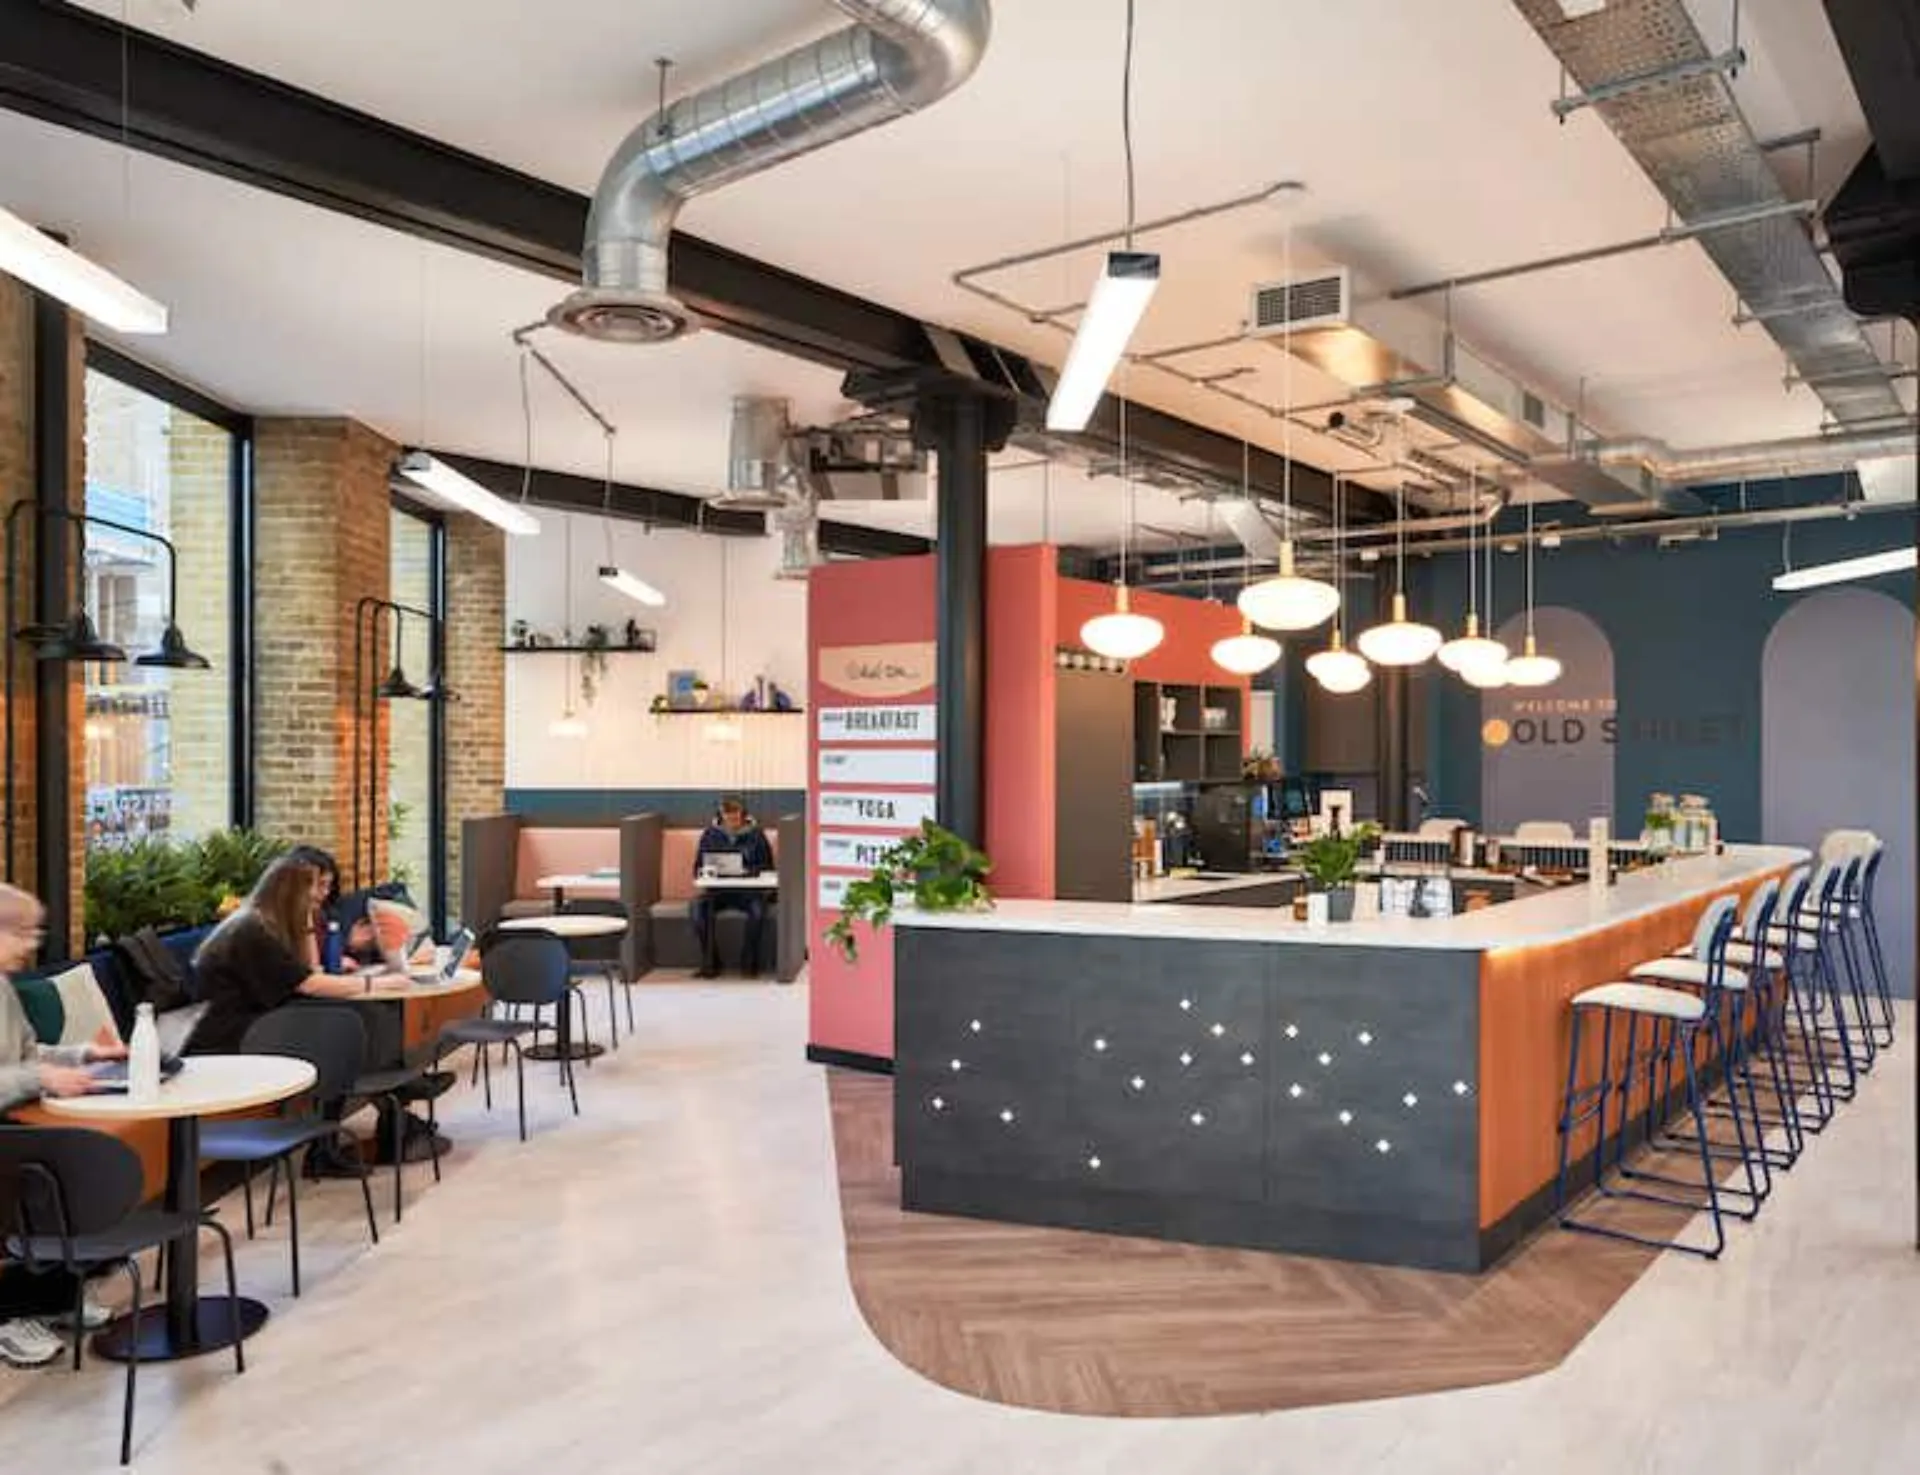 Work.life Co-working space Desks day pass bookings 